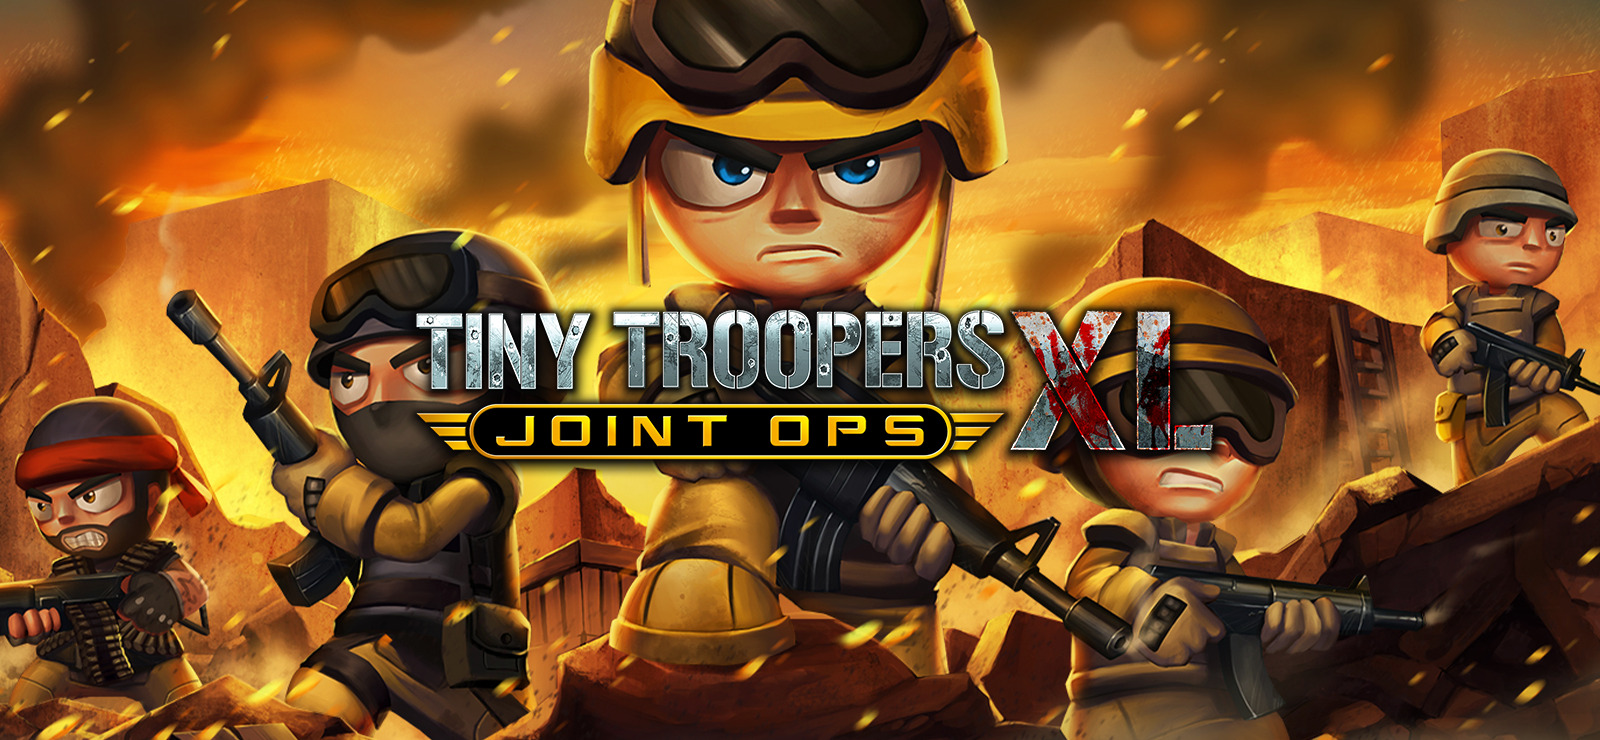 Tiny Troopers Joint Ops XL instaling